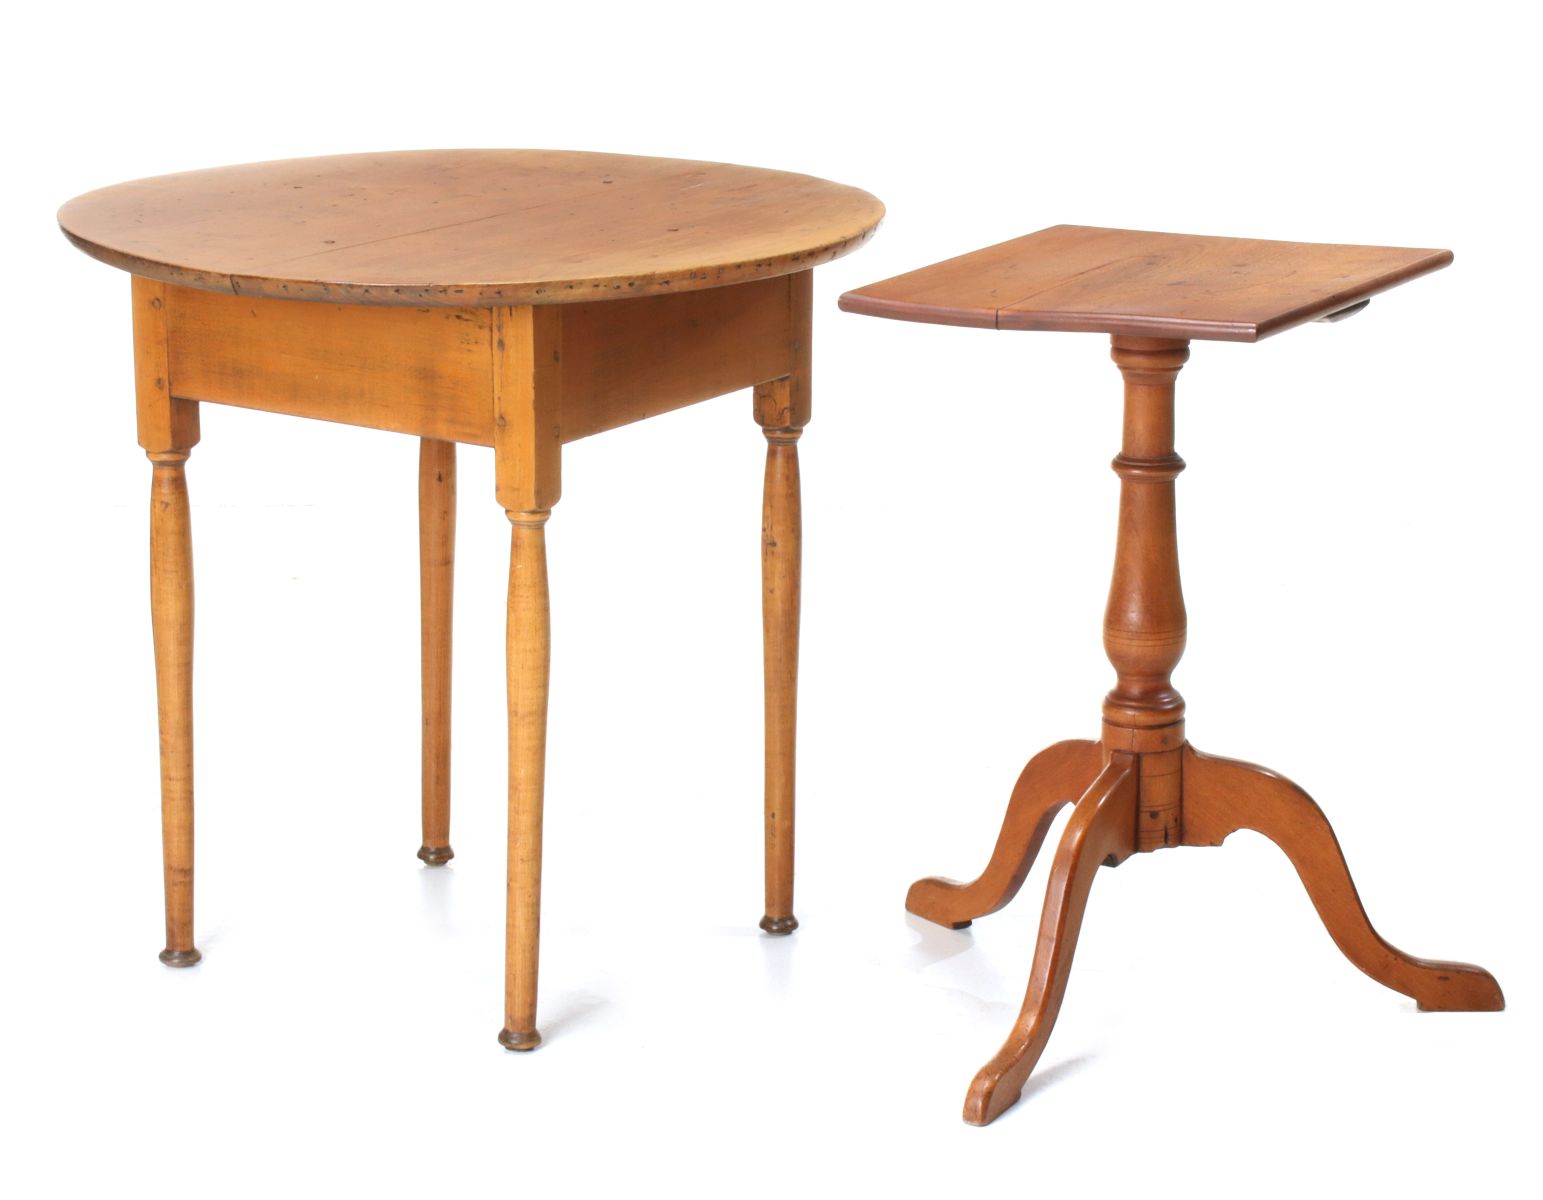 A 19TH C. TAVERN TABLE AND 19TH C. MAPLE CANDLE STAND